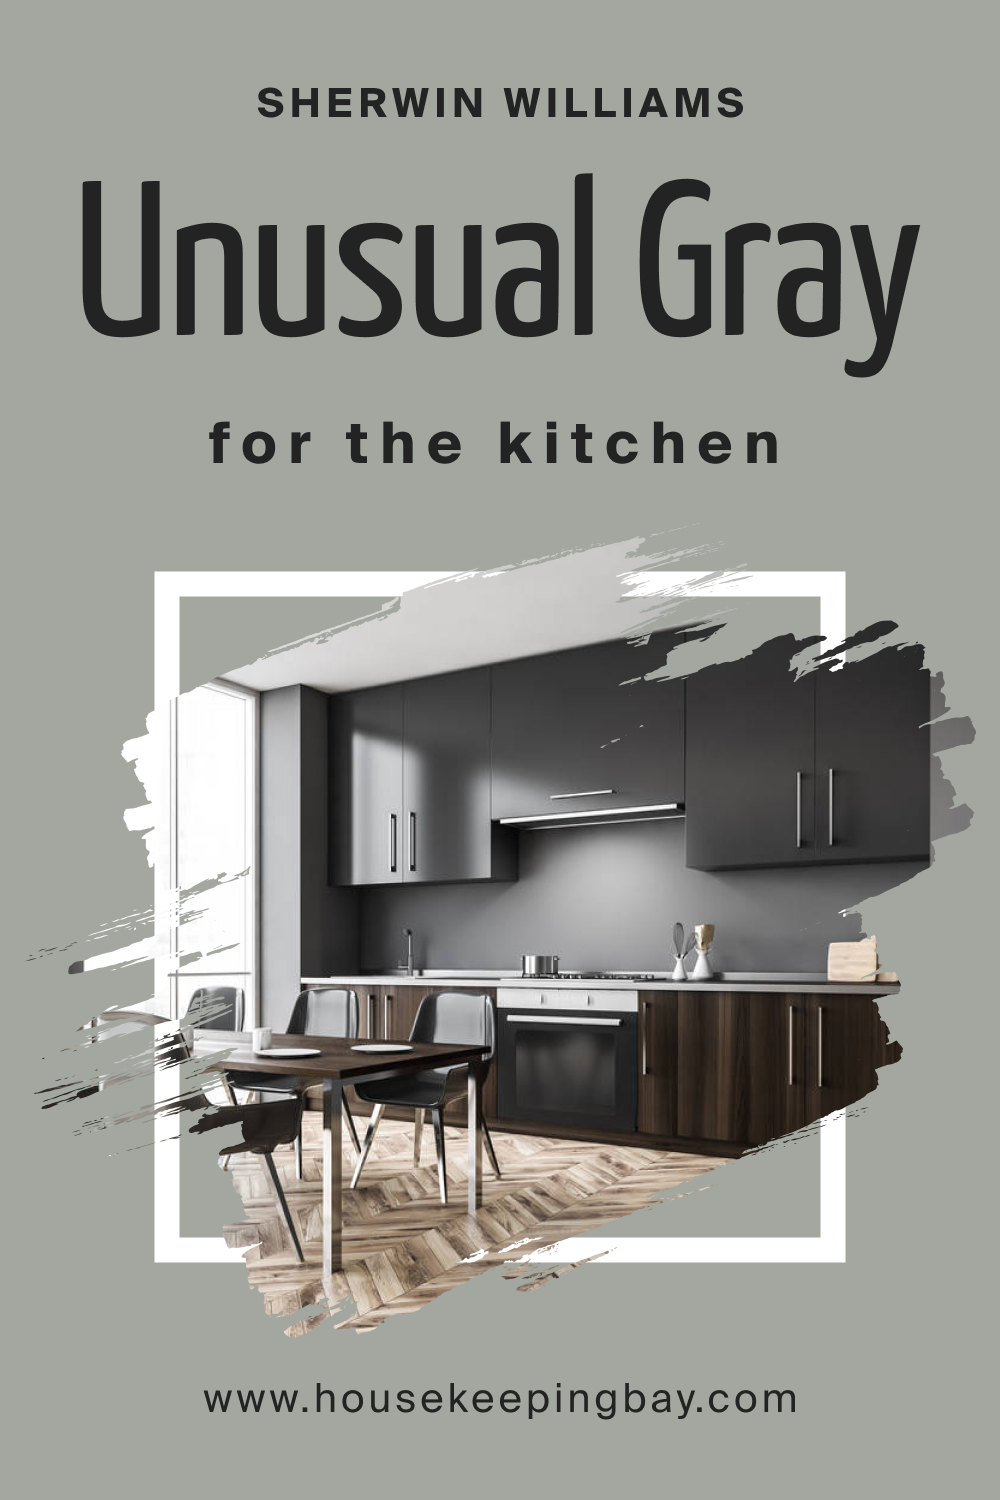 Sherwin Williams. SW 7059 Unusual Gray For the Kitchens